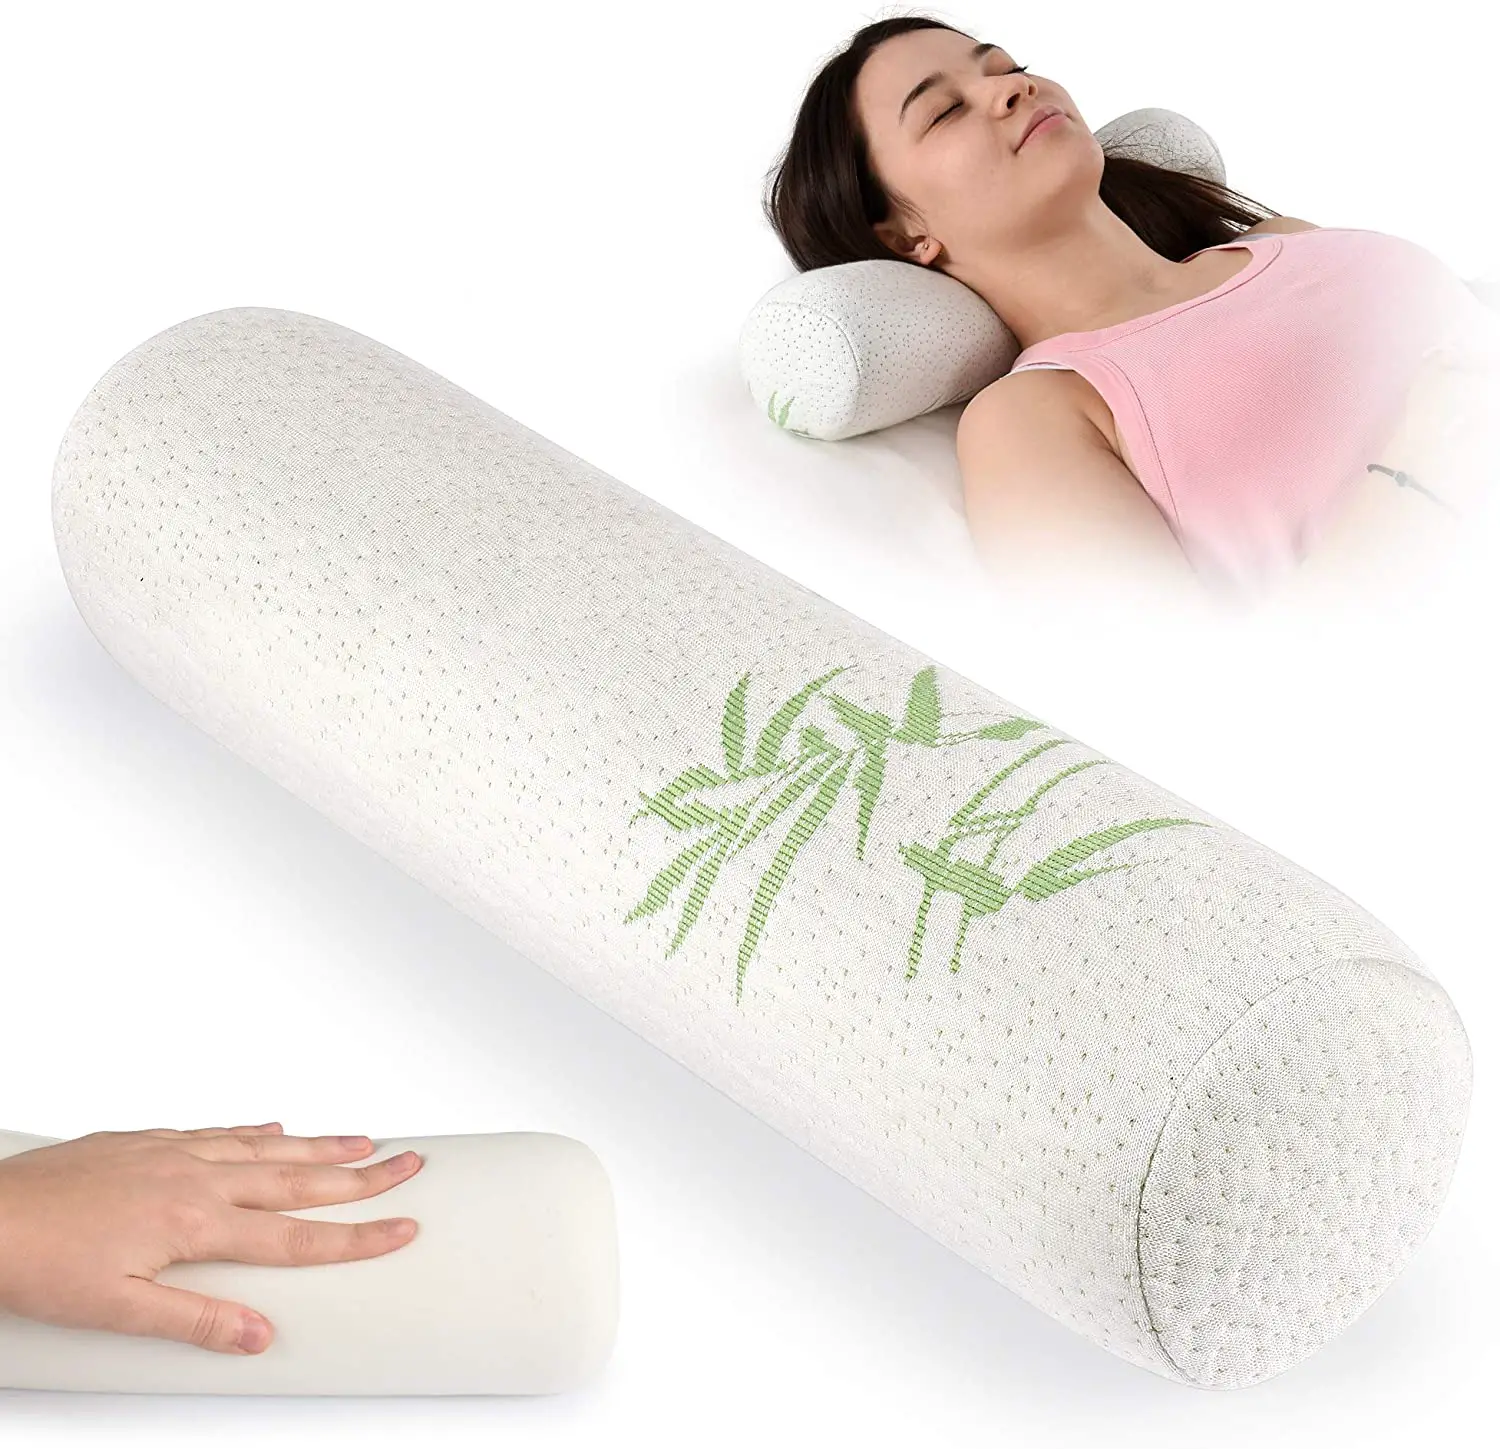 Amazon.com: Healthex Cervical Neck roll Pillow Cylinder Round Cushion ...